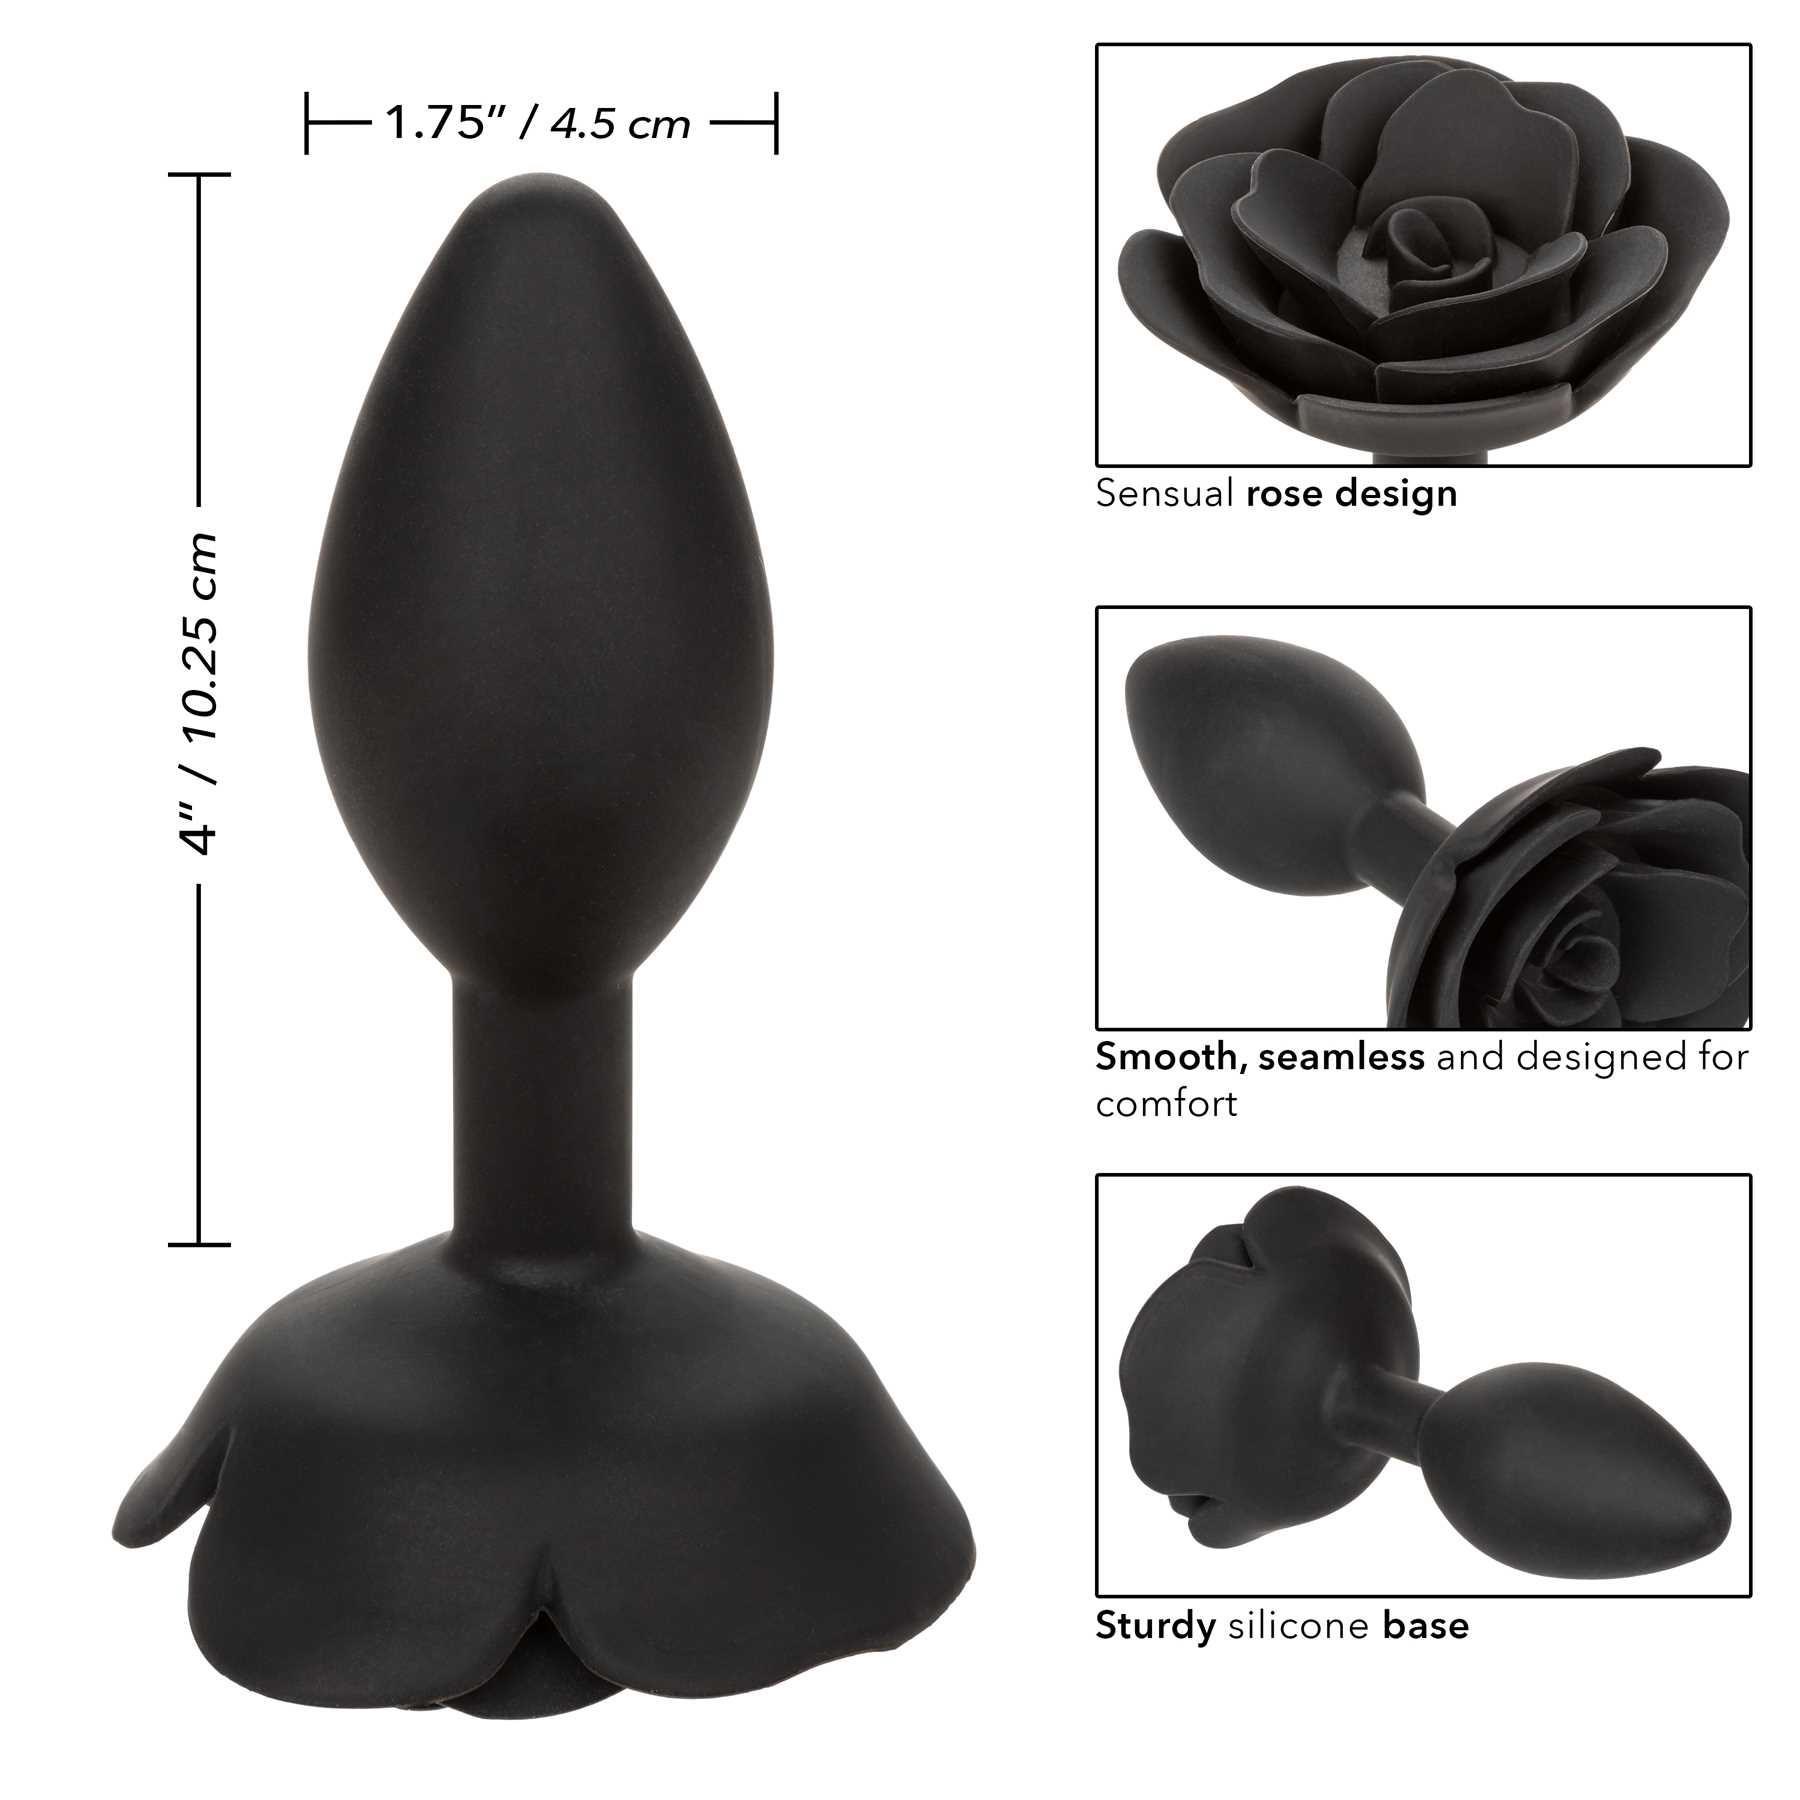 Forbidden Large Rose Anal Plug dimensions and feature call out sheet